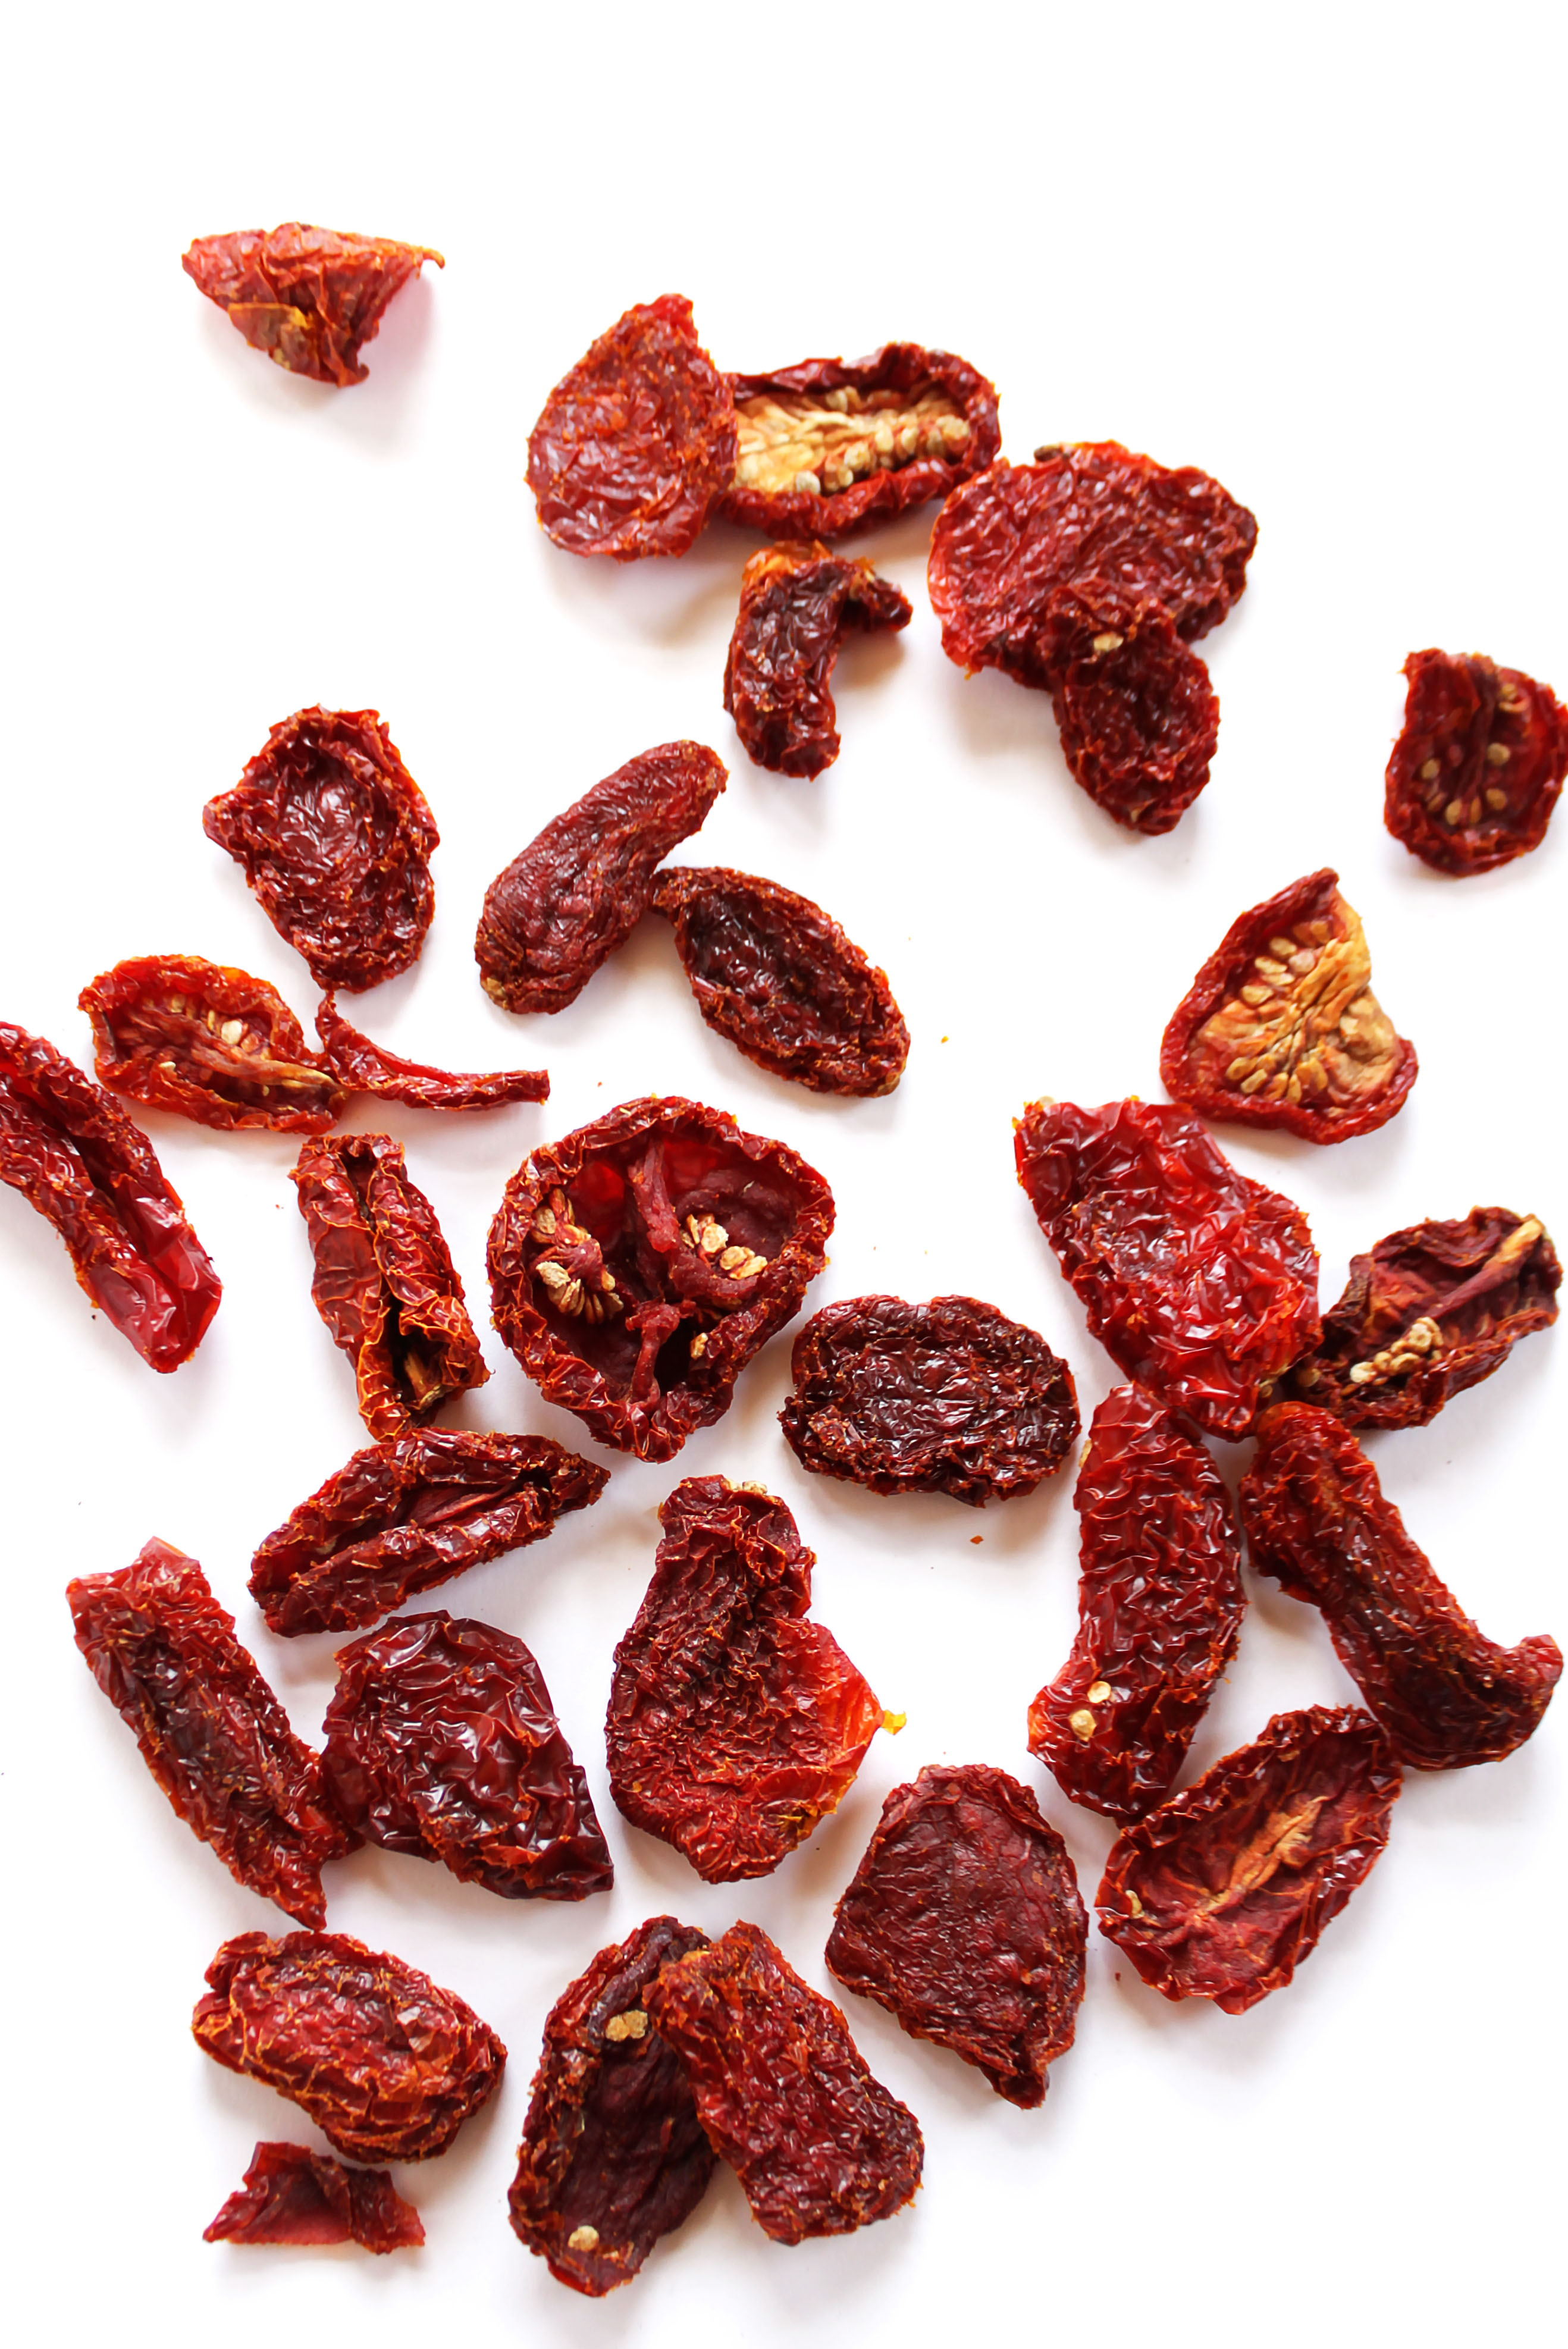 Sundried Tomatoes for sundried tomato chipotle and cream cheese dip!